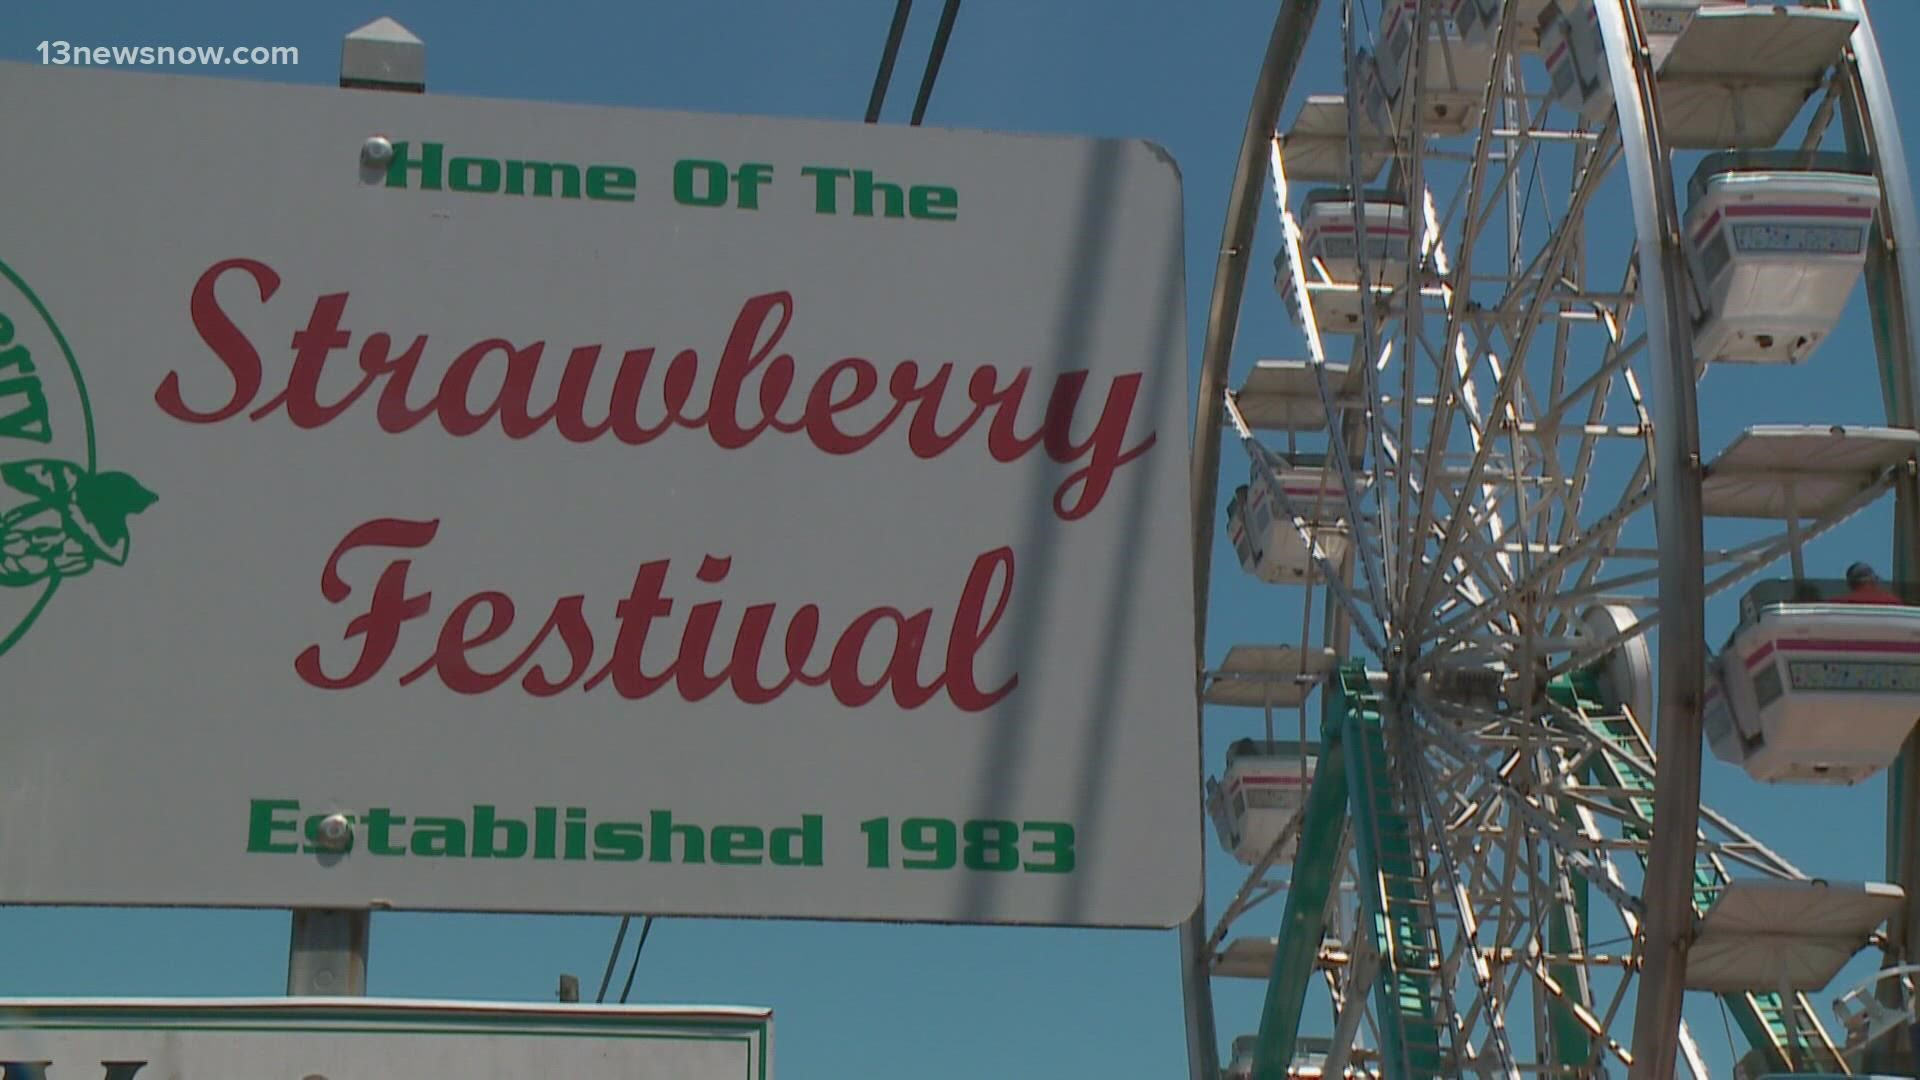 For the third straight year, Pungo's Strawberry Festival has been canceled, this time due to "unforeseen circumstances and time constraints to resolve the issues."